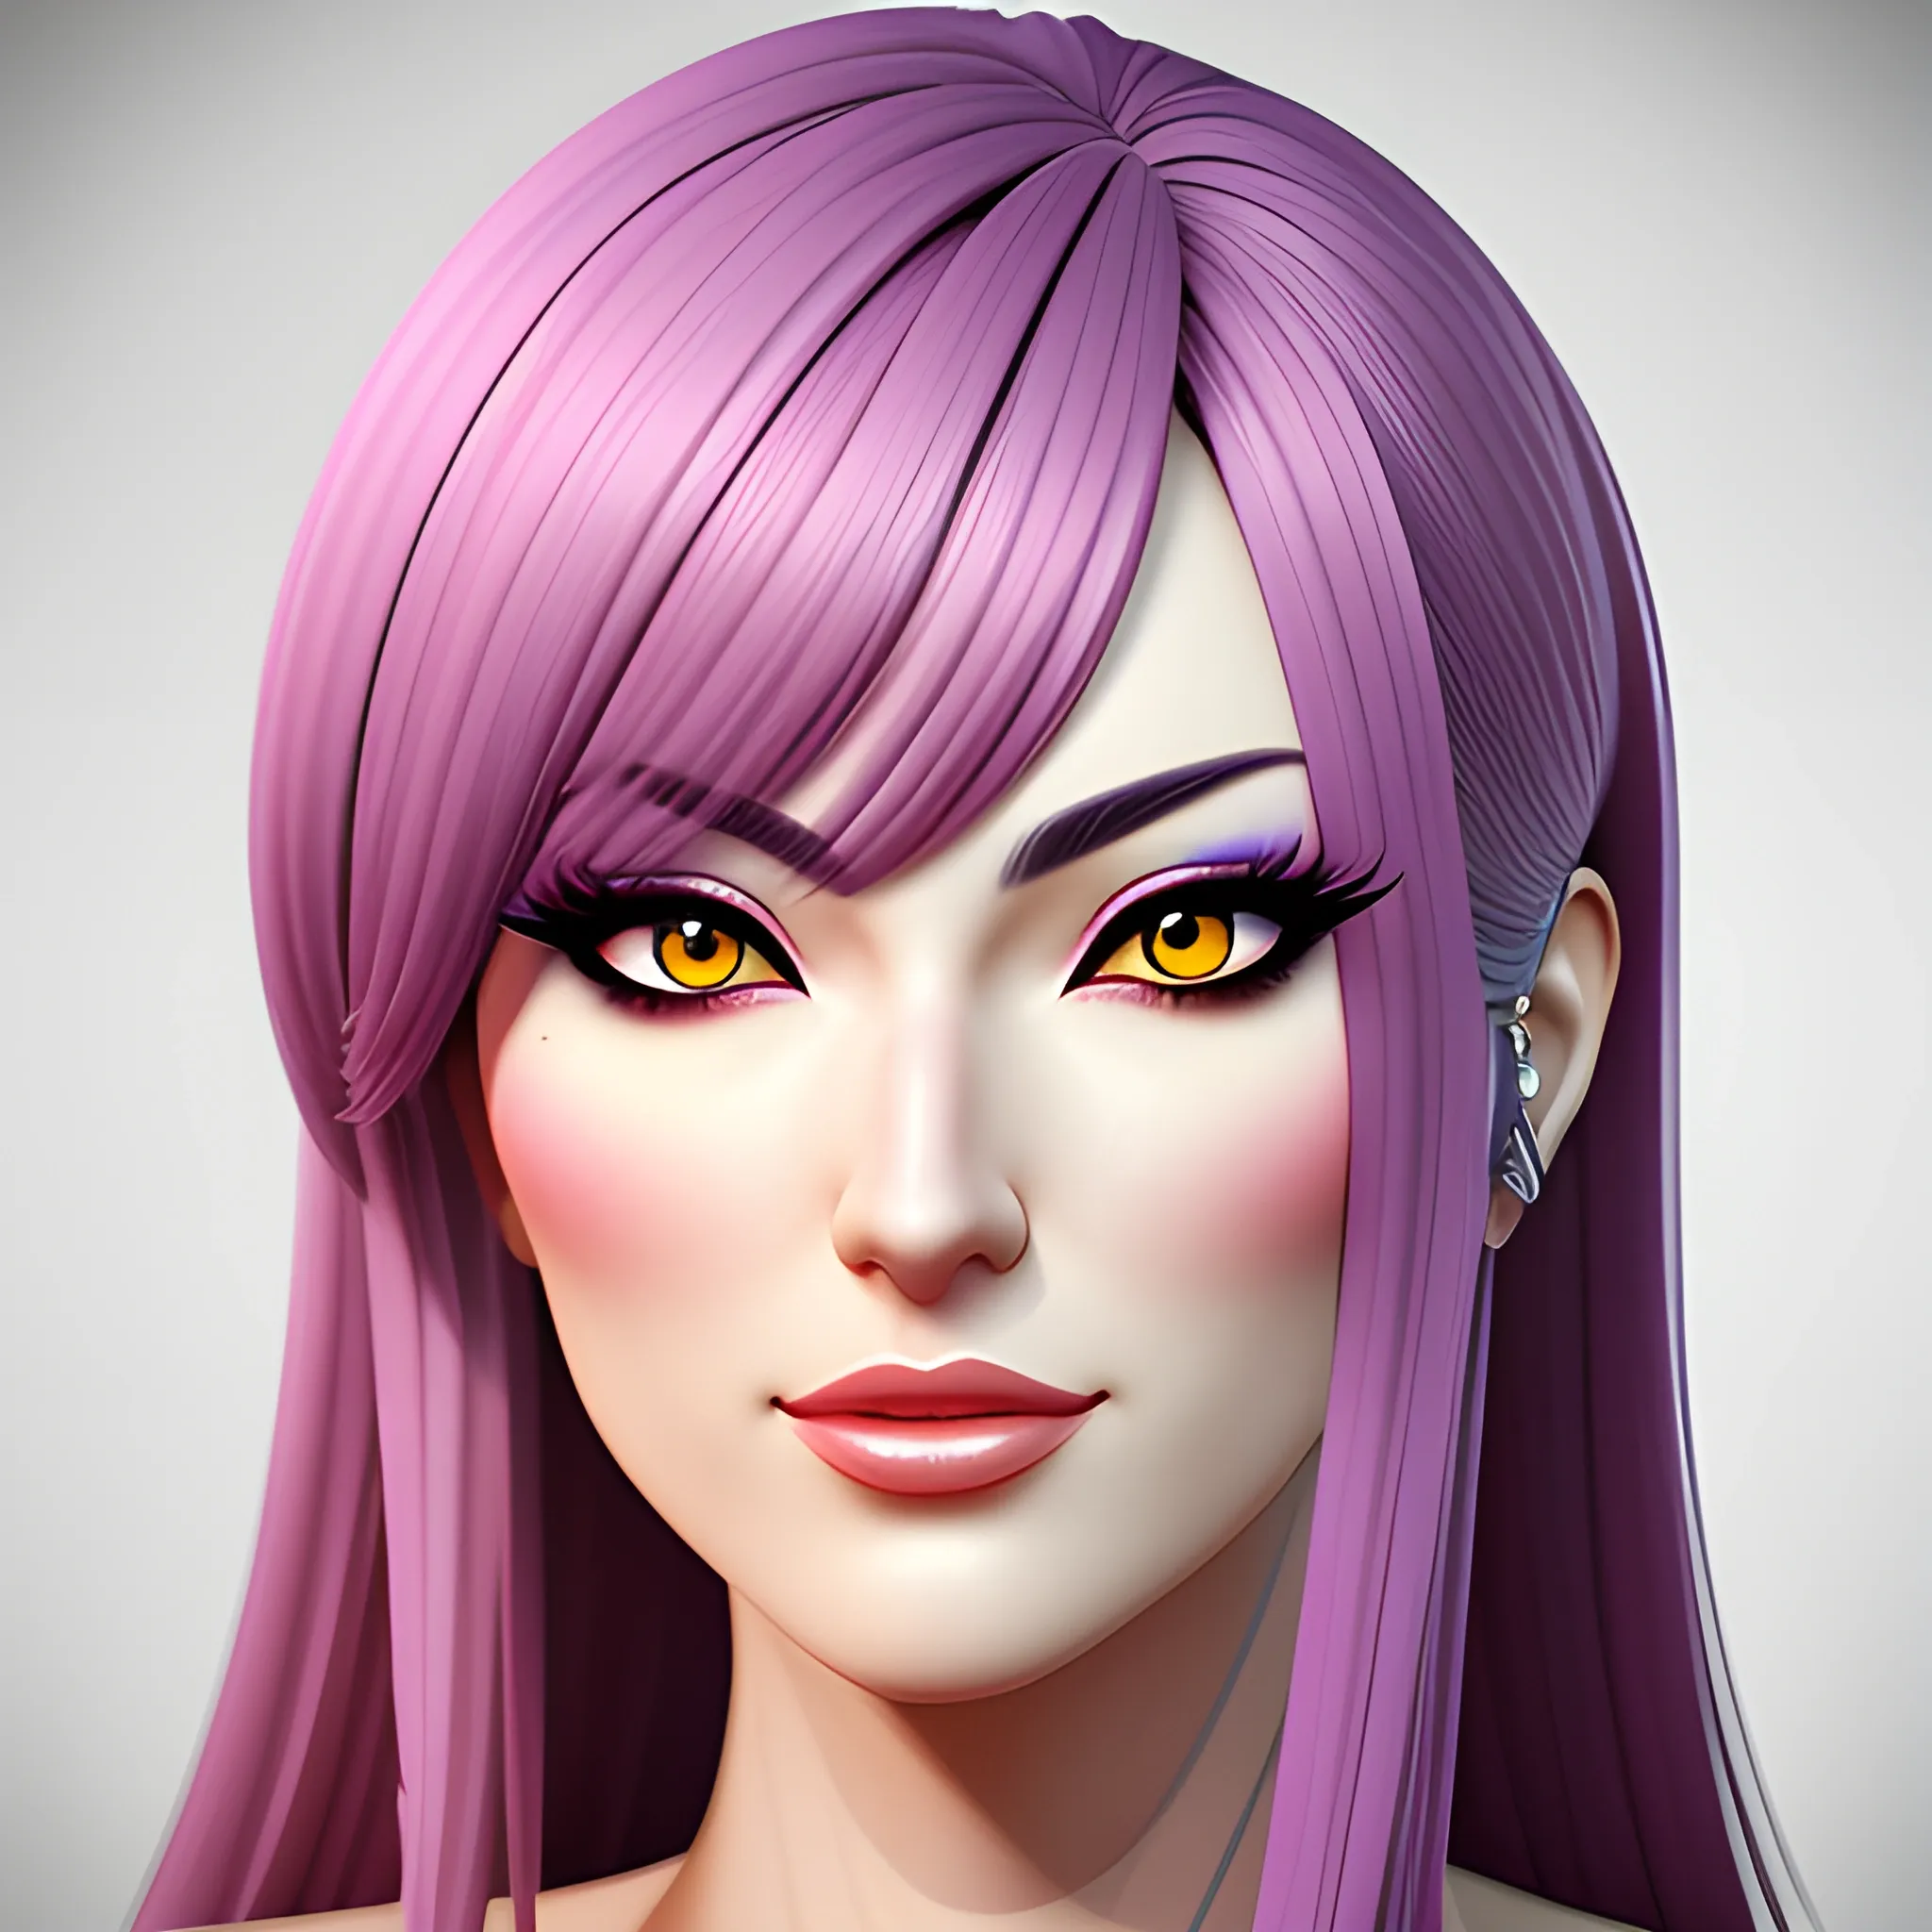 A young online freelancing girl, colorful anime decoration, hyper-realistic portrait style, 3D rendered, high resolution